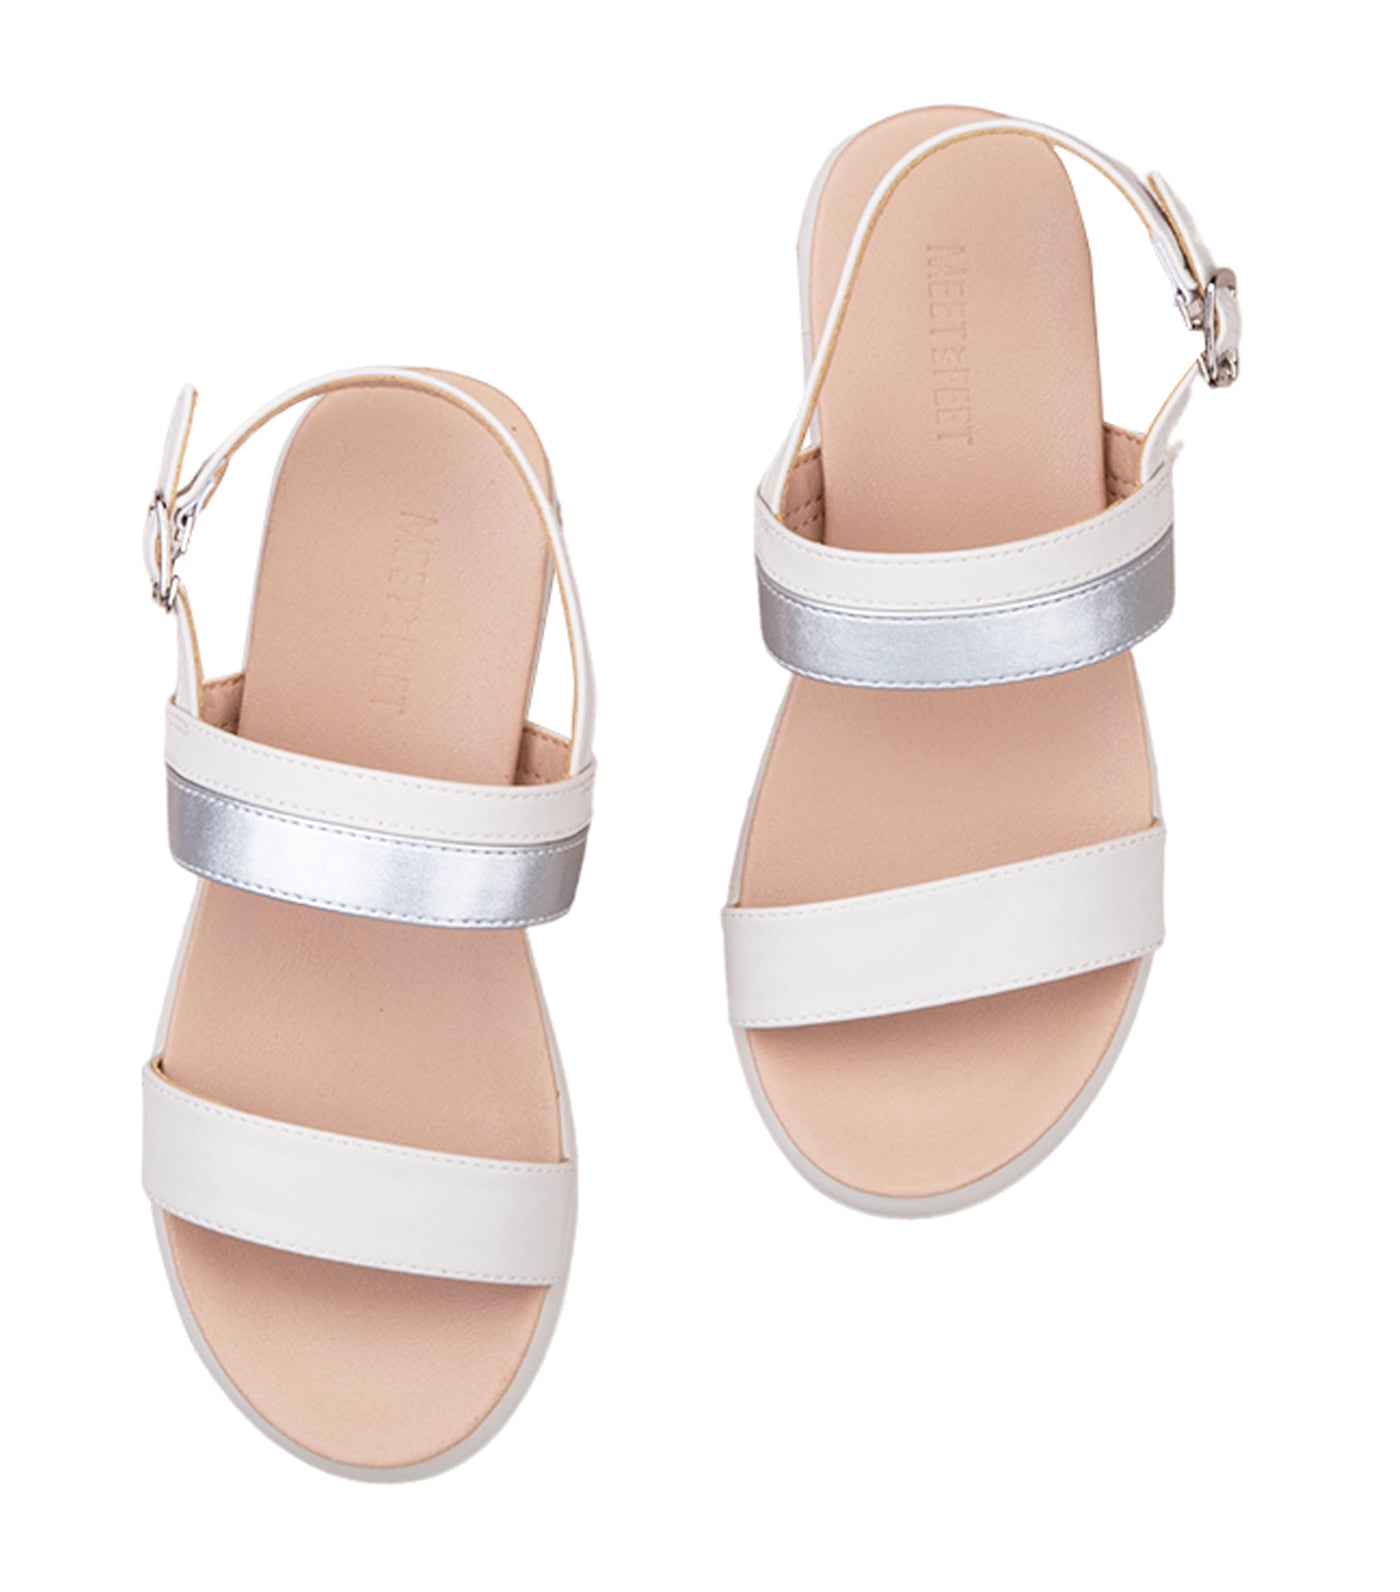 Blanche Kids Sandals for Girls - Silver